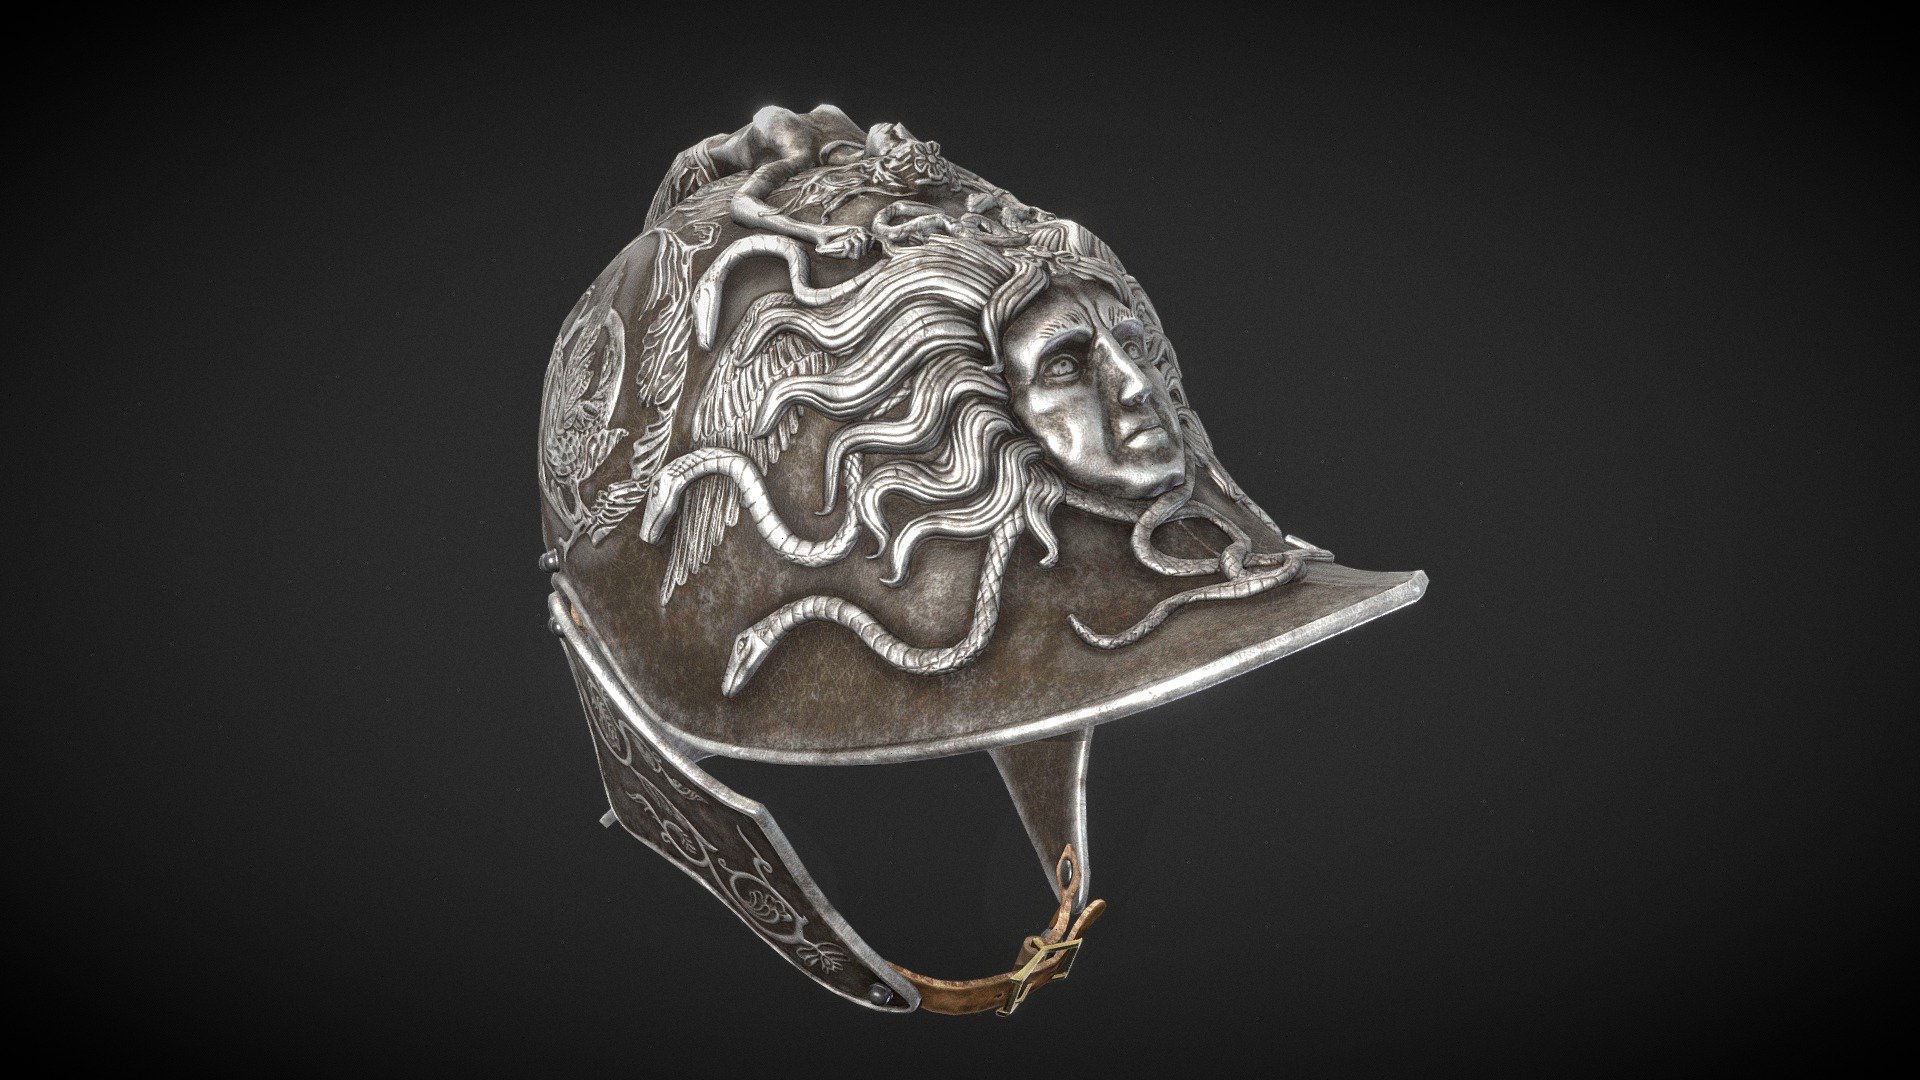 Highly decorative helmet based on the work of Filippo Negroli - a 16th Century Italian master armourer. 

The helmet is covered in an embossed design comprising of Acanthus scrolls and with a reclining mermaid forming the crest 3d model